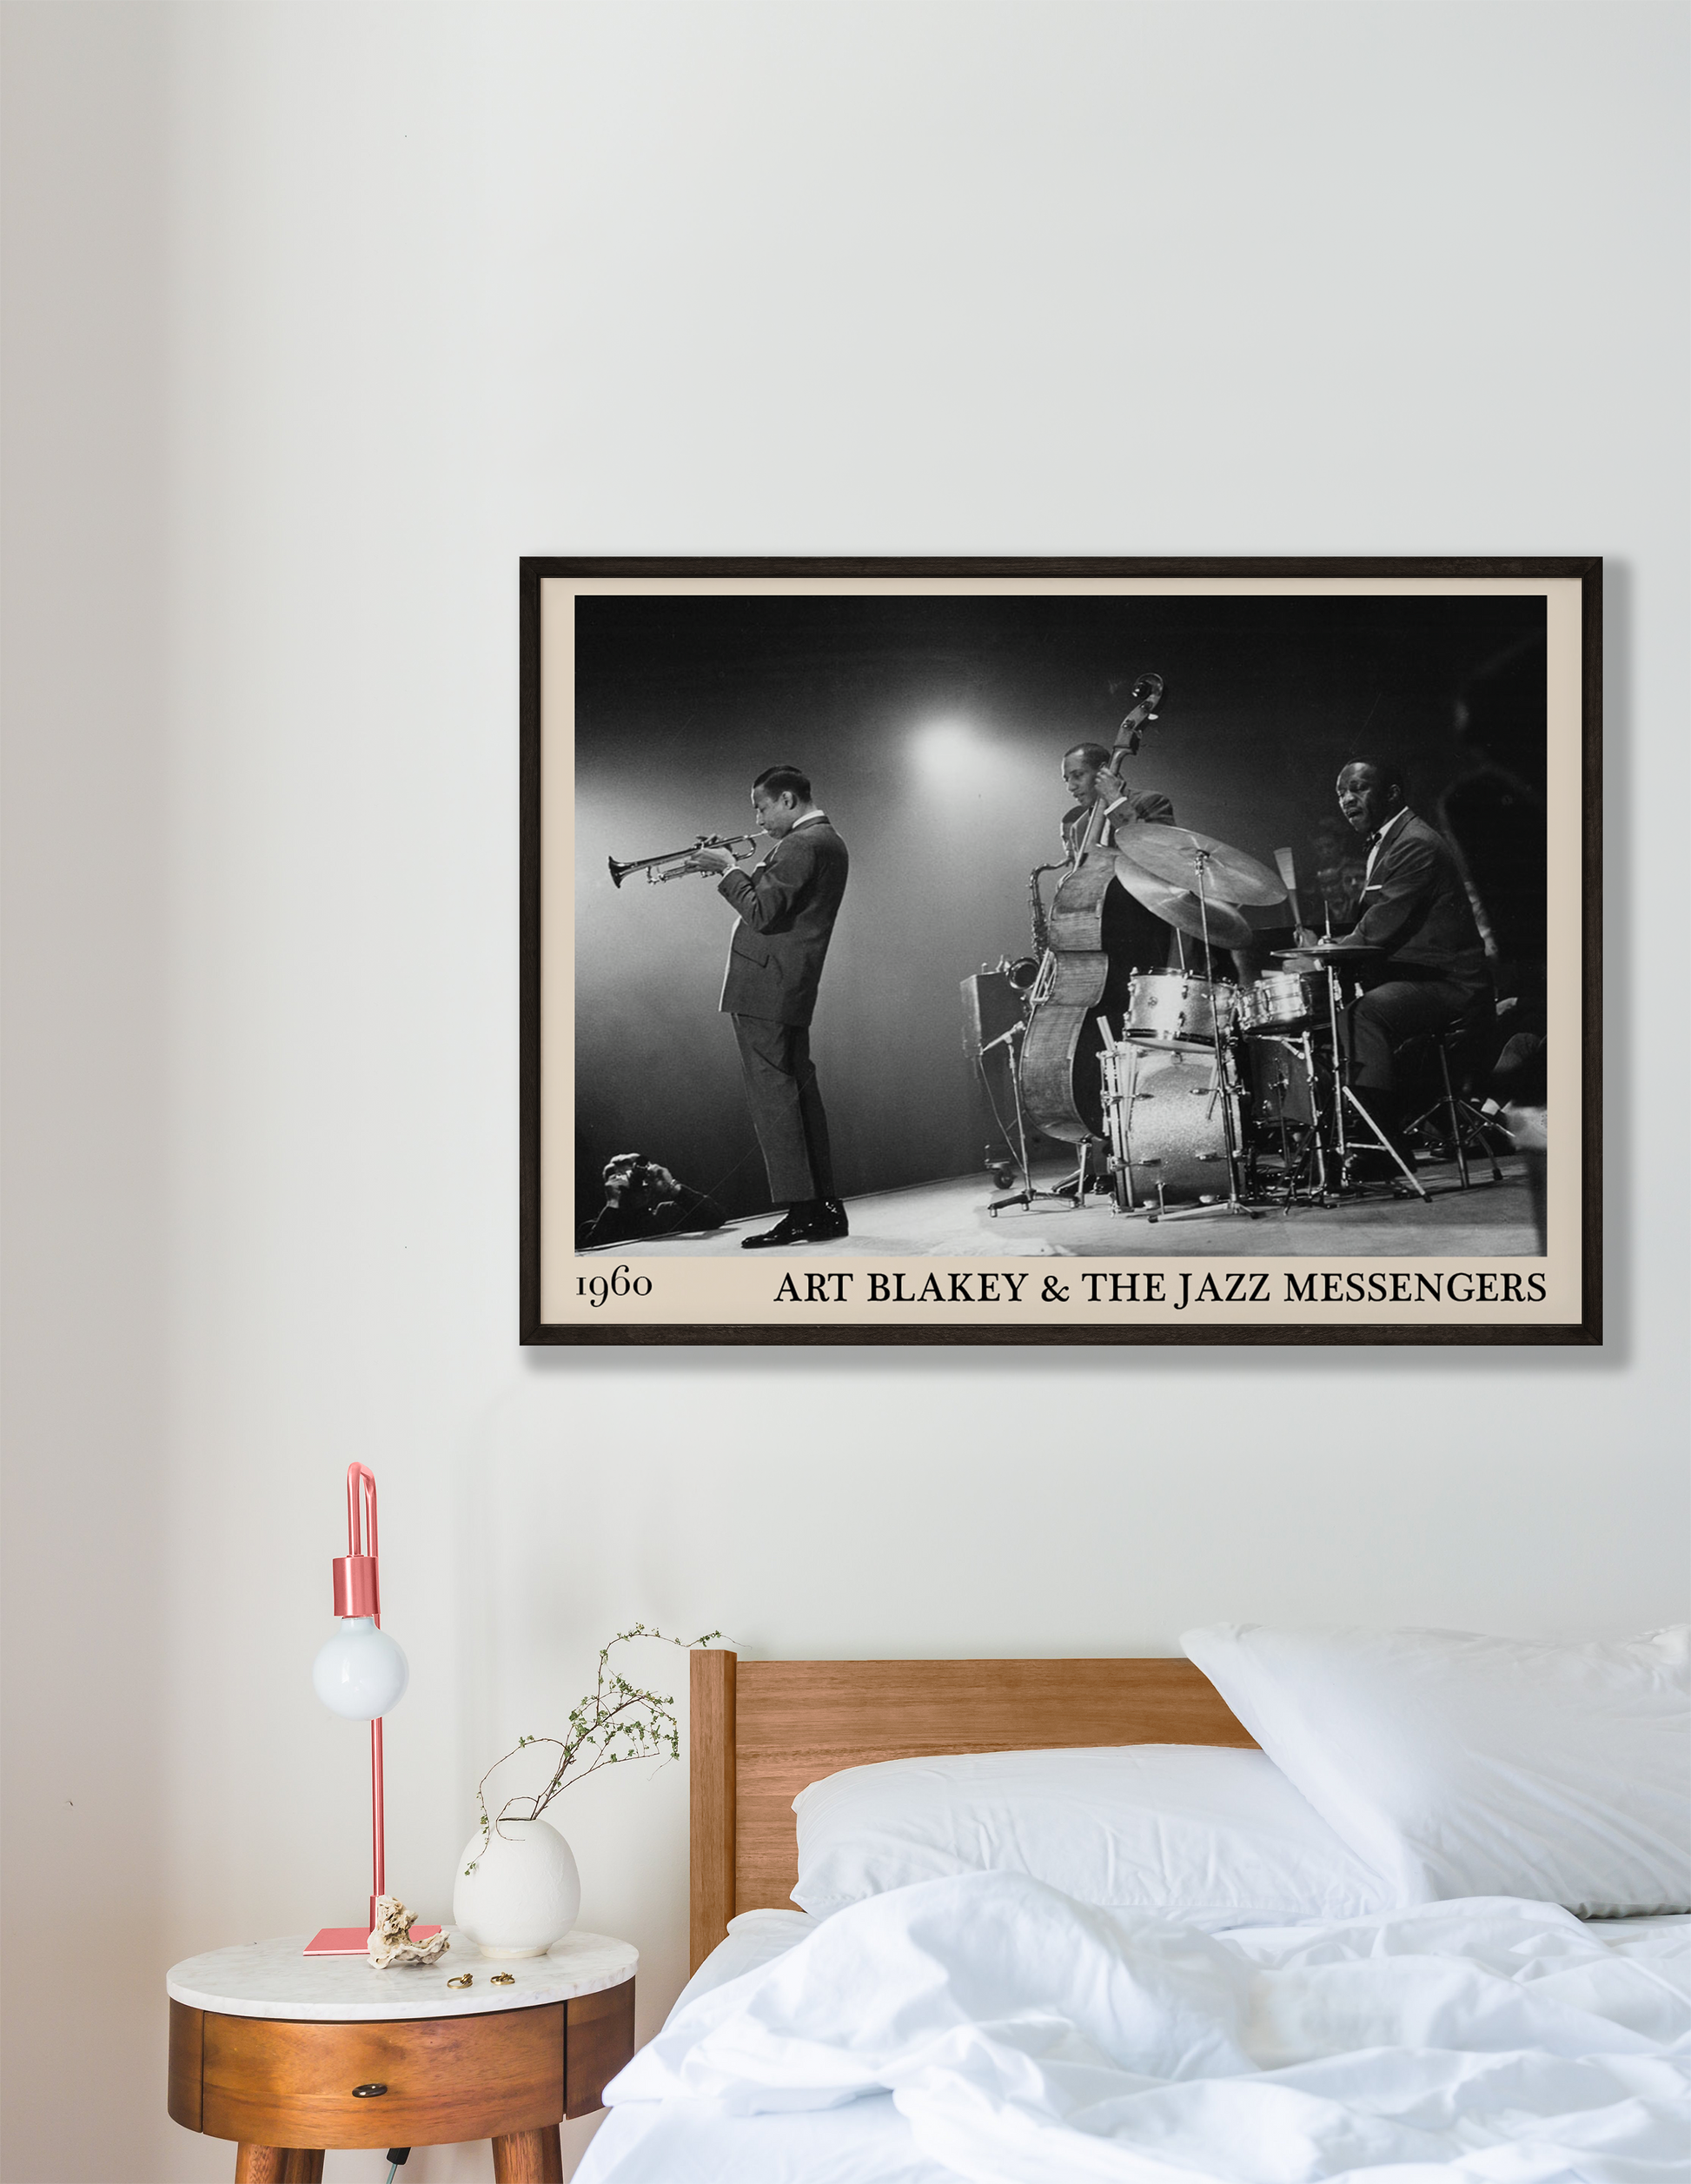 Retro framed print of Art Blakey & The Jazz Messengers hanging on a white wall in a bedroom